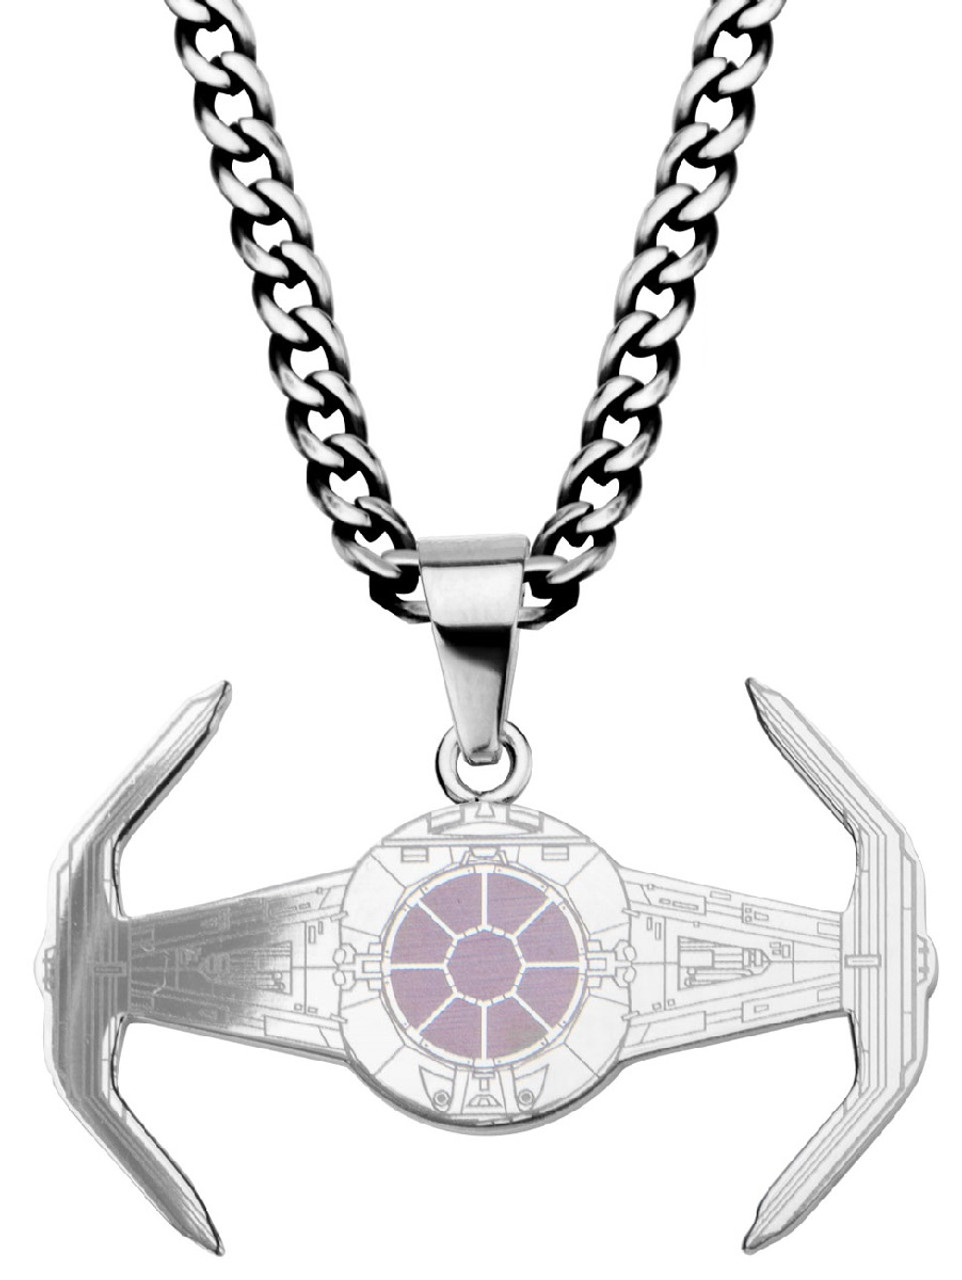 DARTH VADER - Necklace Metal Pendant Chain 1977 Star Wars - collectibles -  by owner - sale - craigslist